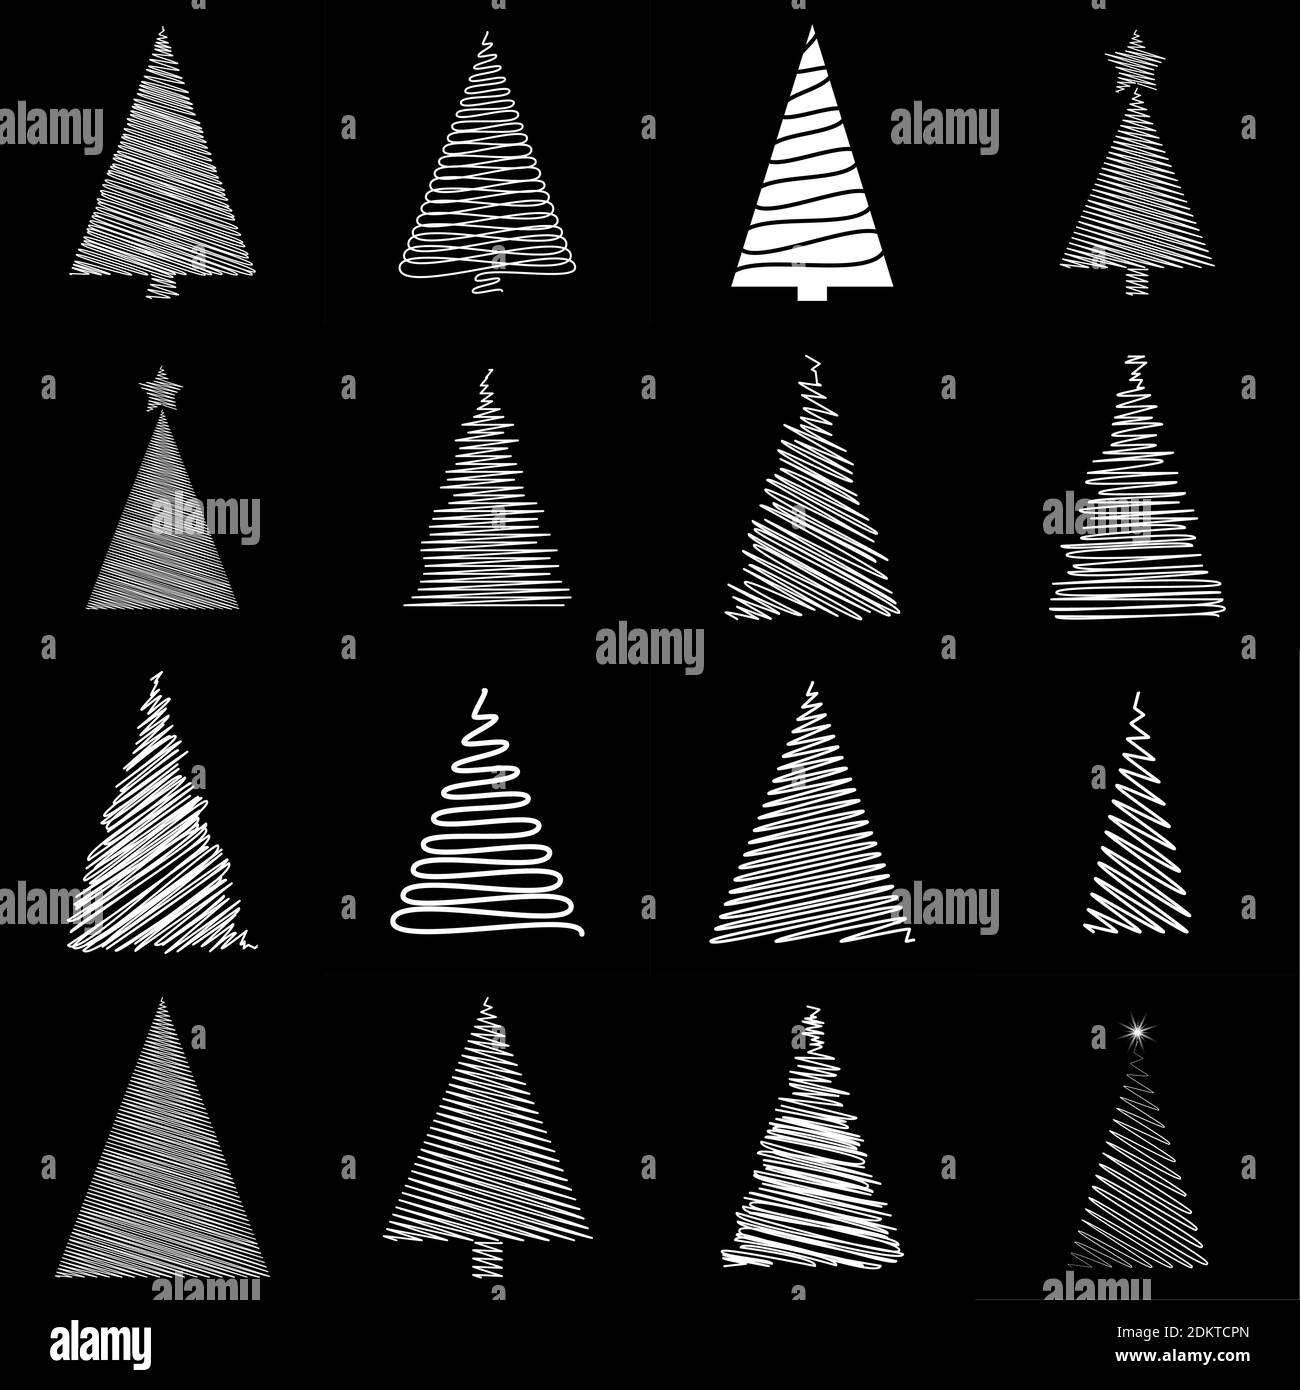 Scribble christmas tree set. Doodle fir tree collection. Hand-drawn festive vector illustration isolated on black background. White childlike drawing Stock Vector